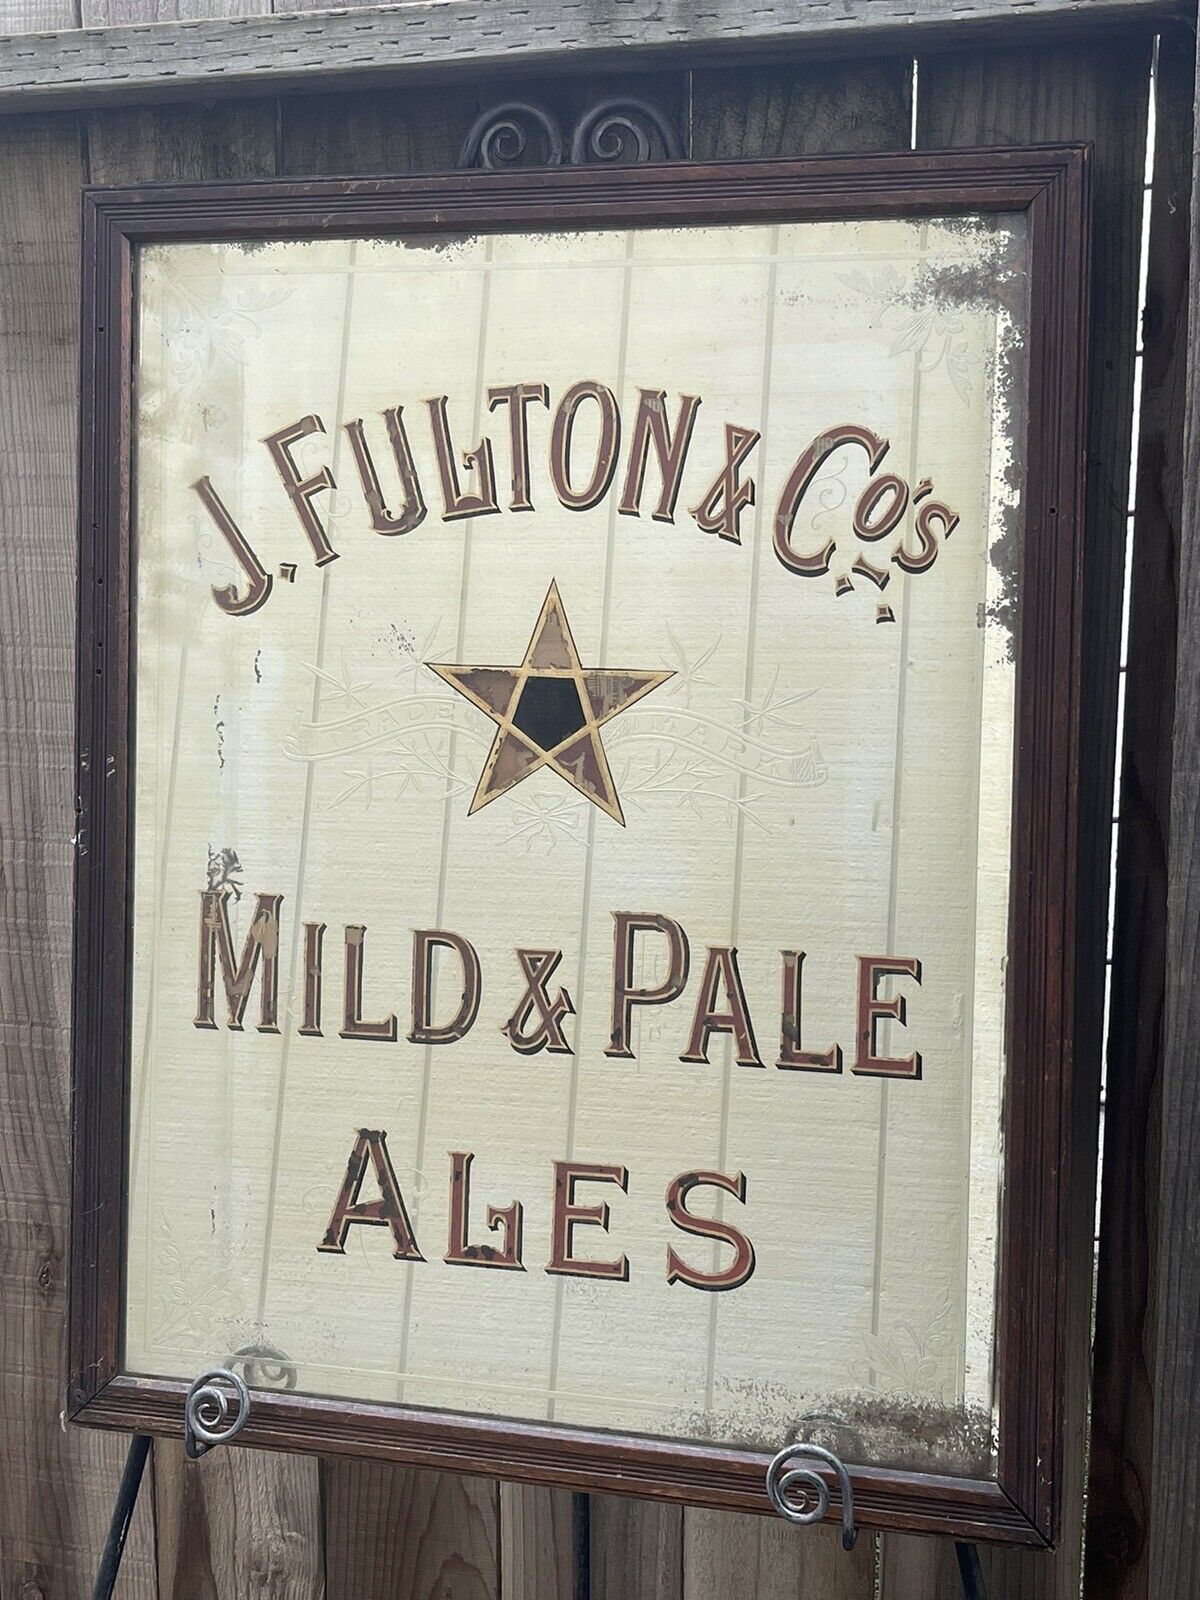 1901 J Fulton & Cos MILD & PALE ALES  Reverse Glass Mirrored Beer Pub 33x26 Sign